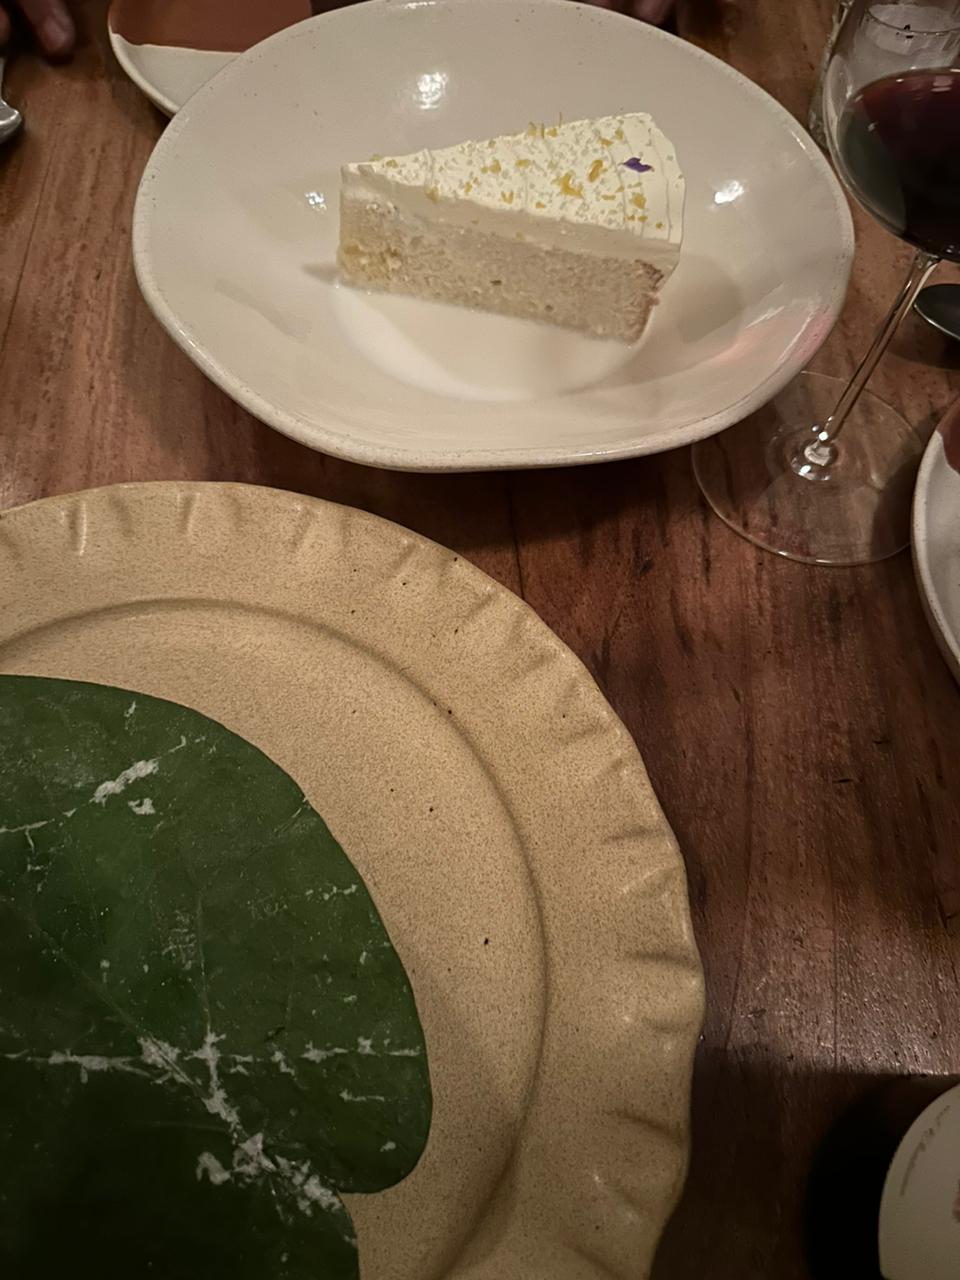 Two desserts from Rosetta- (bottom) Hoja santa and criollo white bean cacao, and (top) Lavender tres leches cake